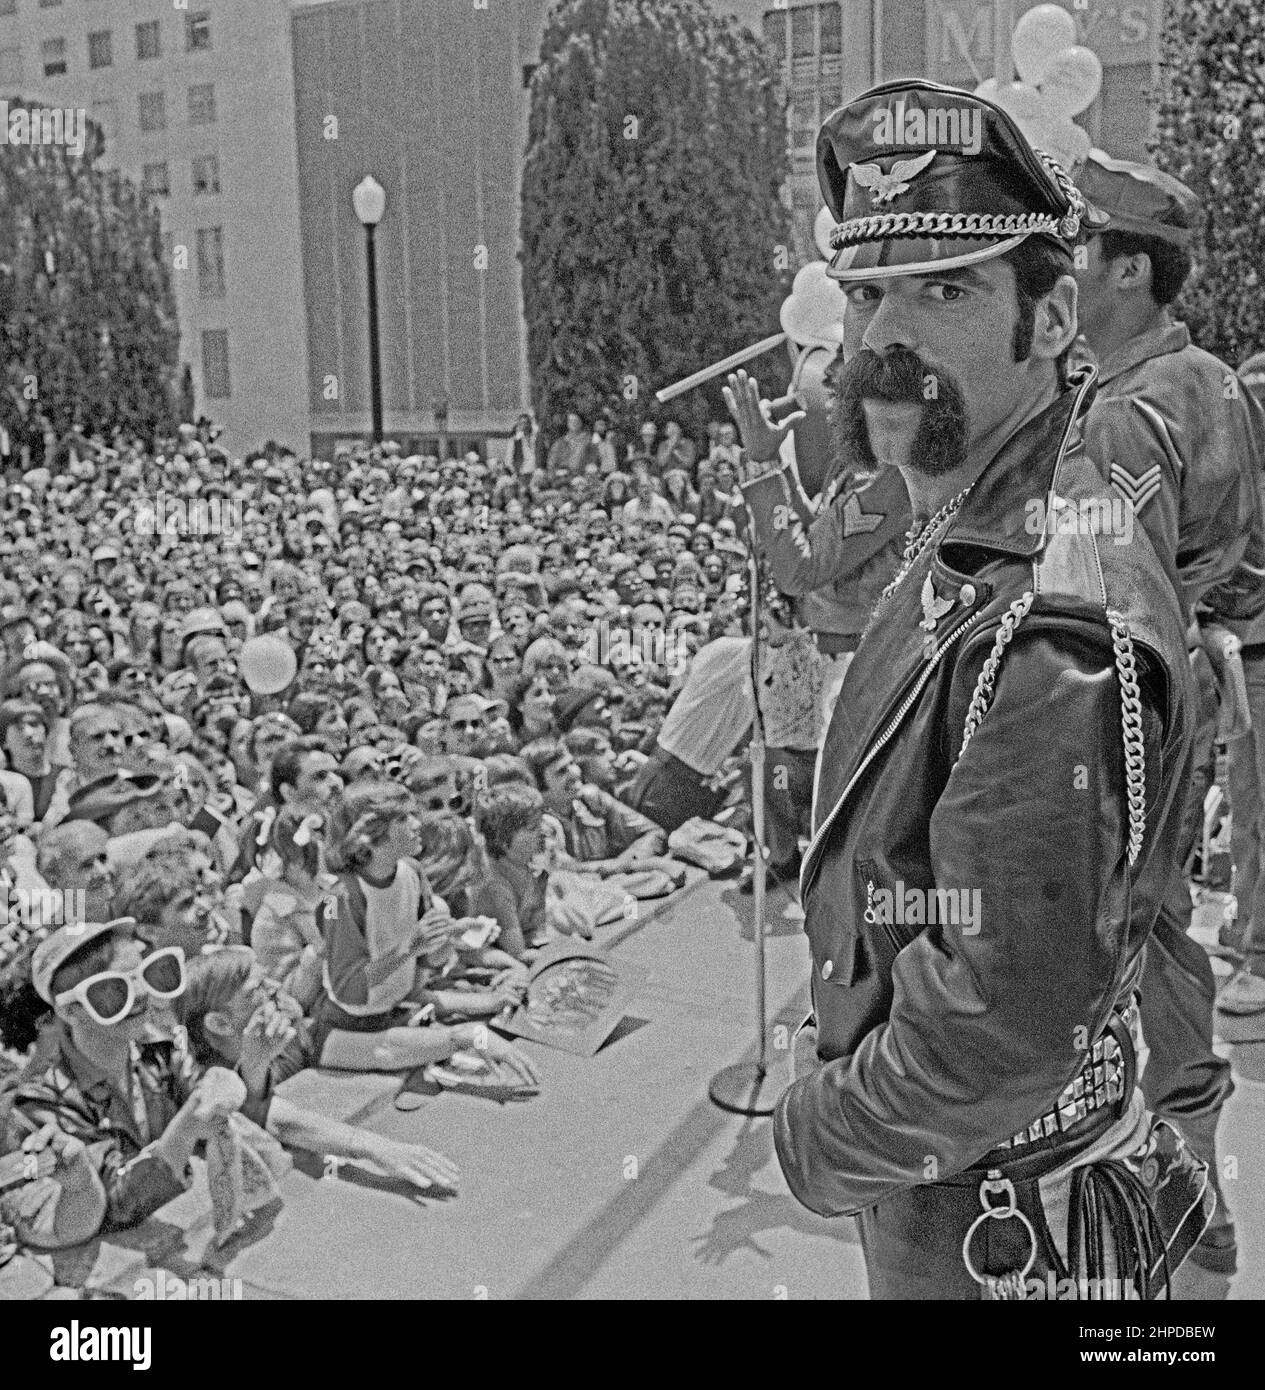 Clenn Michael Hughes the  original 'leatherman' character in the disco group Village People performs in San Francisco's Union Square, California. June, 1980 Stock Photo